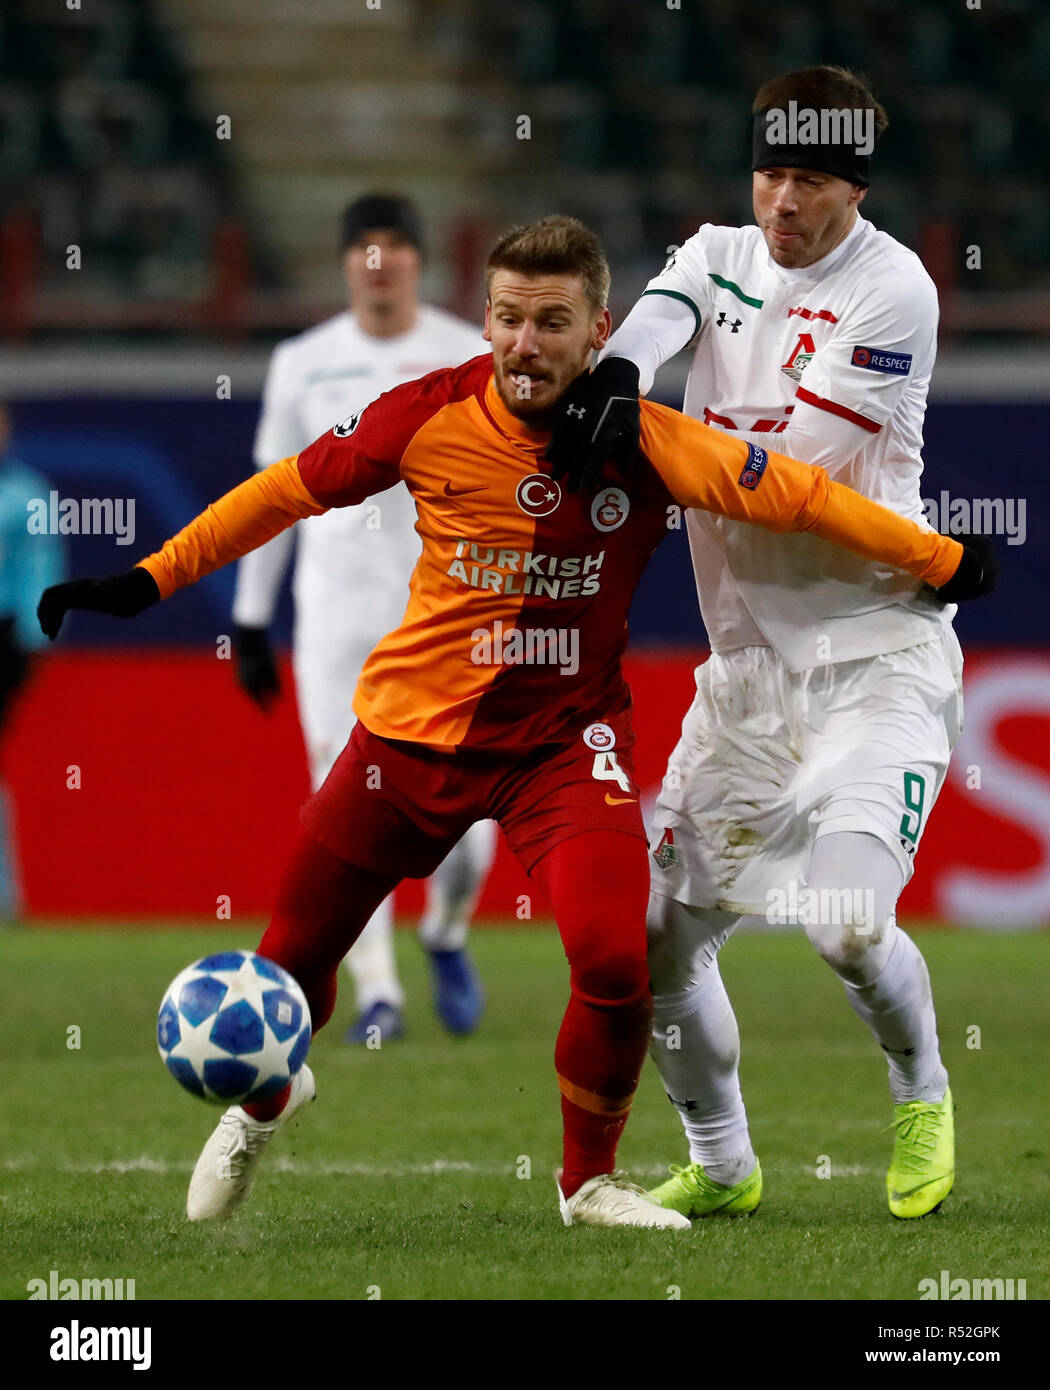 MOSCOW, RUSSIA - NOVEMBER 28: Fedor Smolov (R) of FC Lokomotiv Moscow and Serdar Aziz of Galatasaray vie for the ball during the Group D match of the UEFA Champions League between FC Lokomotiv Moscow and Galatasaray at Lokomotiv Stadium on November 28, 2018 in Moscow, Russia. (MB Media) Stock Photo